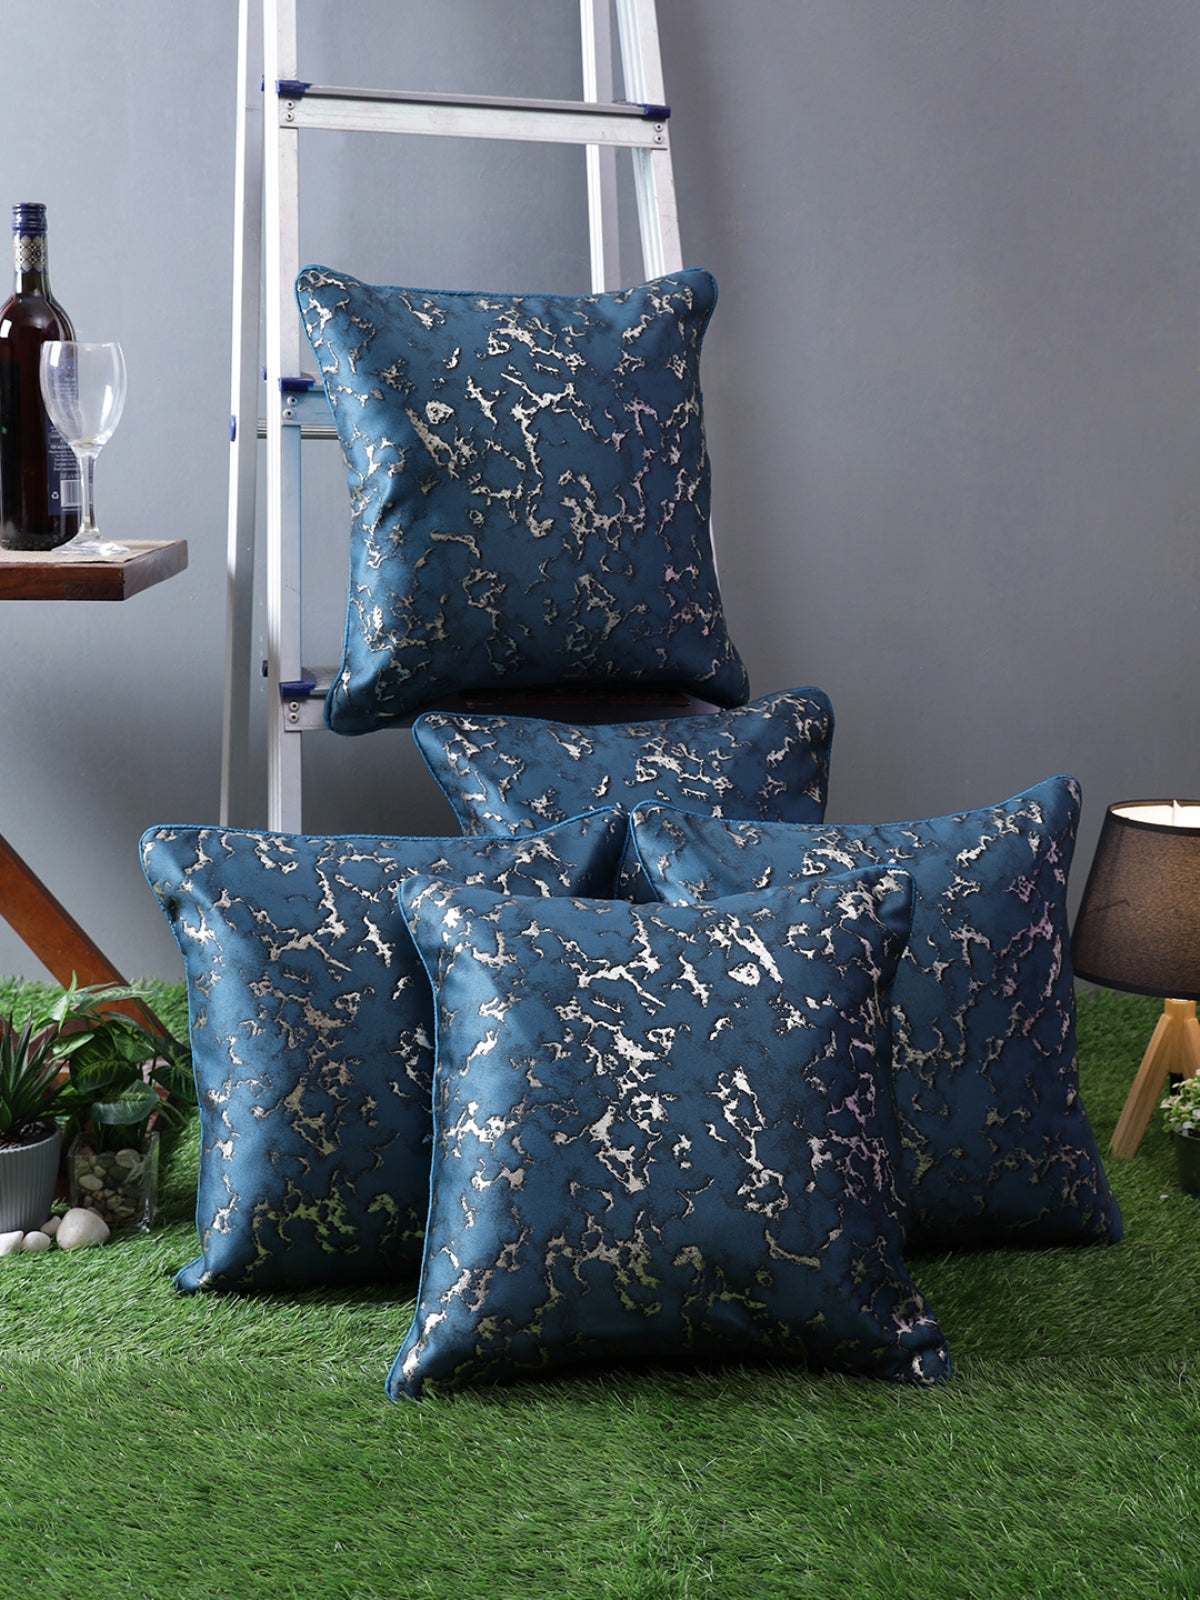 Blue Set of 5 Cushion Covers